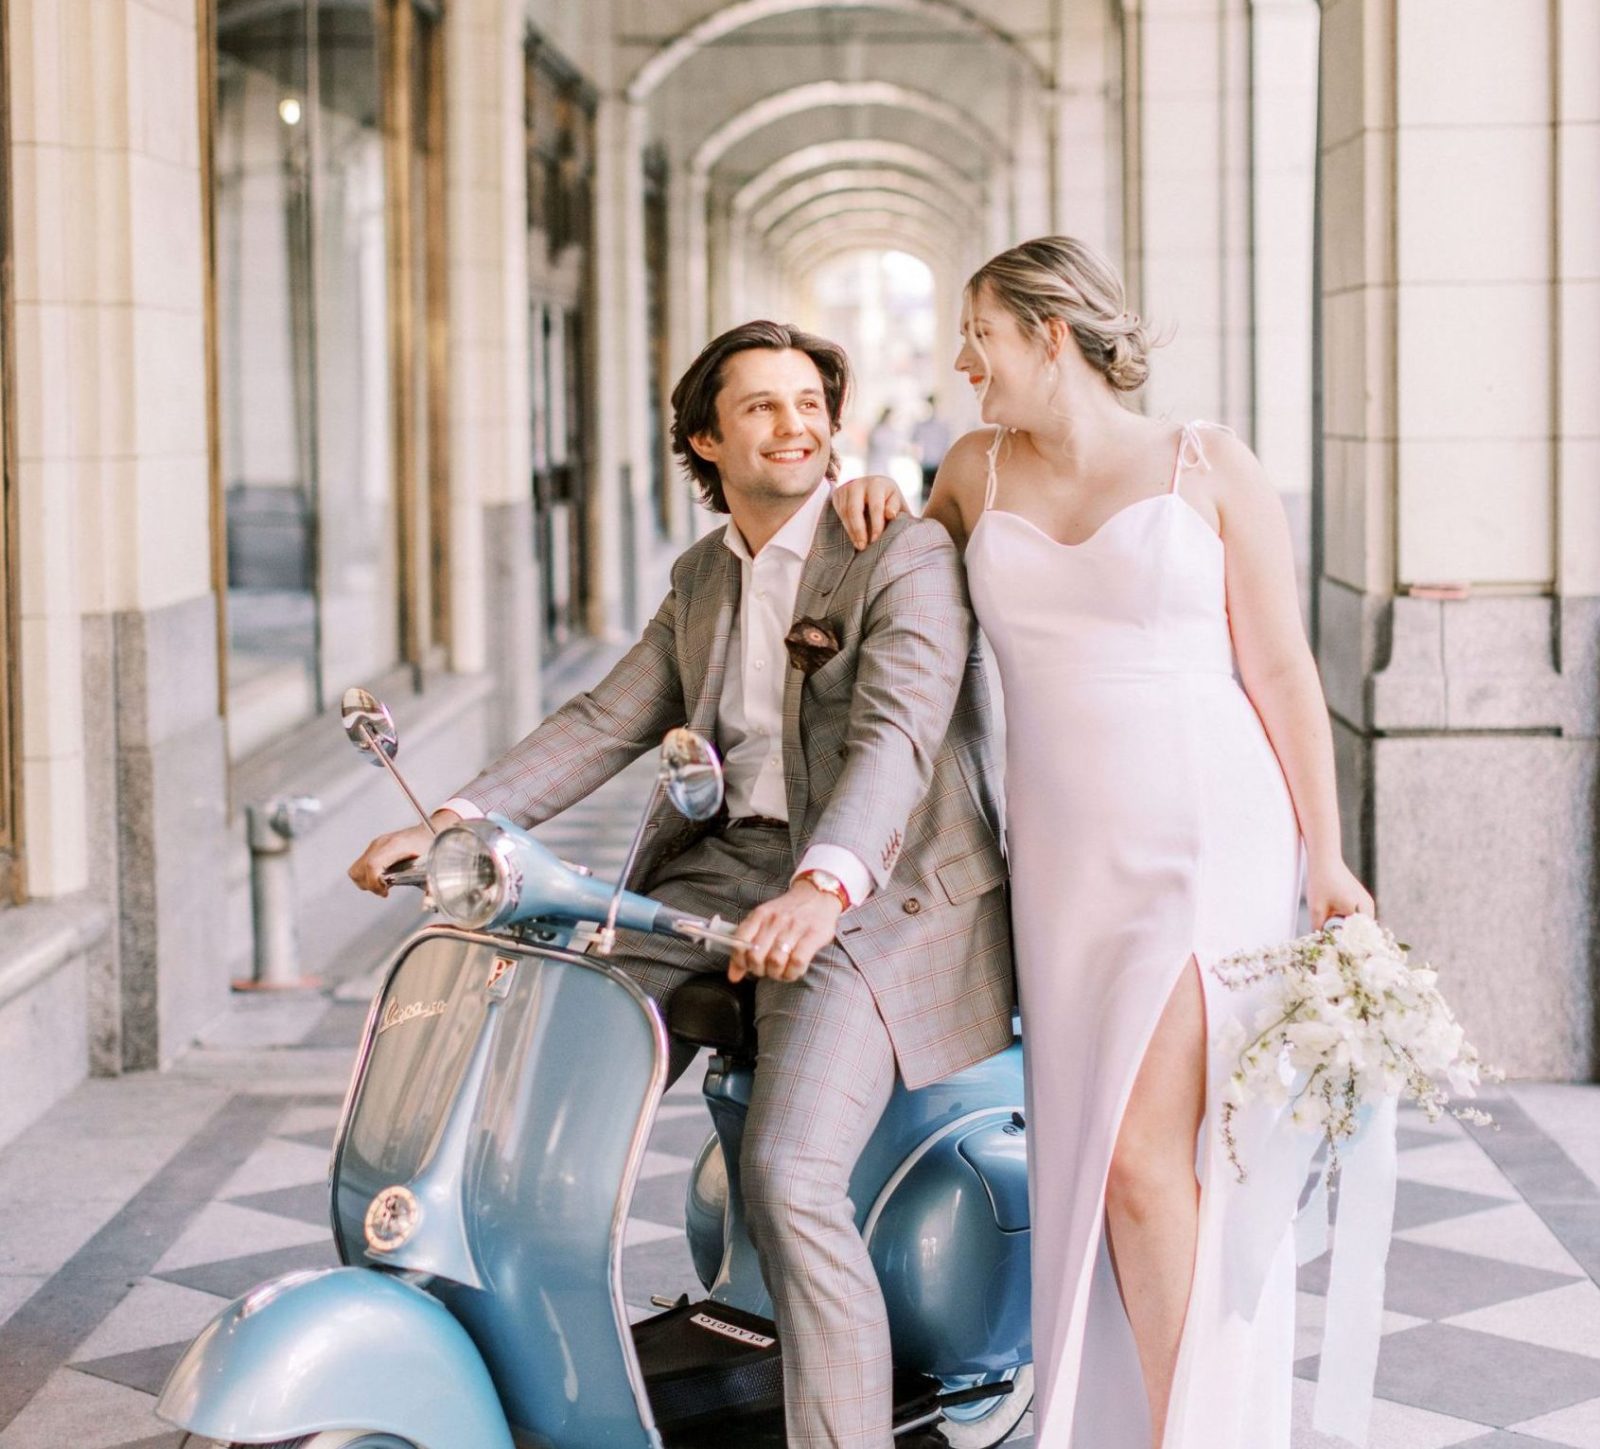 A Chic European-Inspired Elopement Brought to Life in Downtown Calgary Featured by Brontë Bride